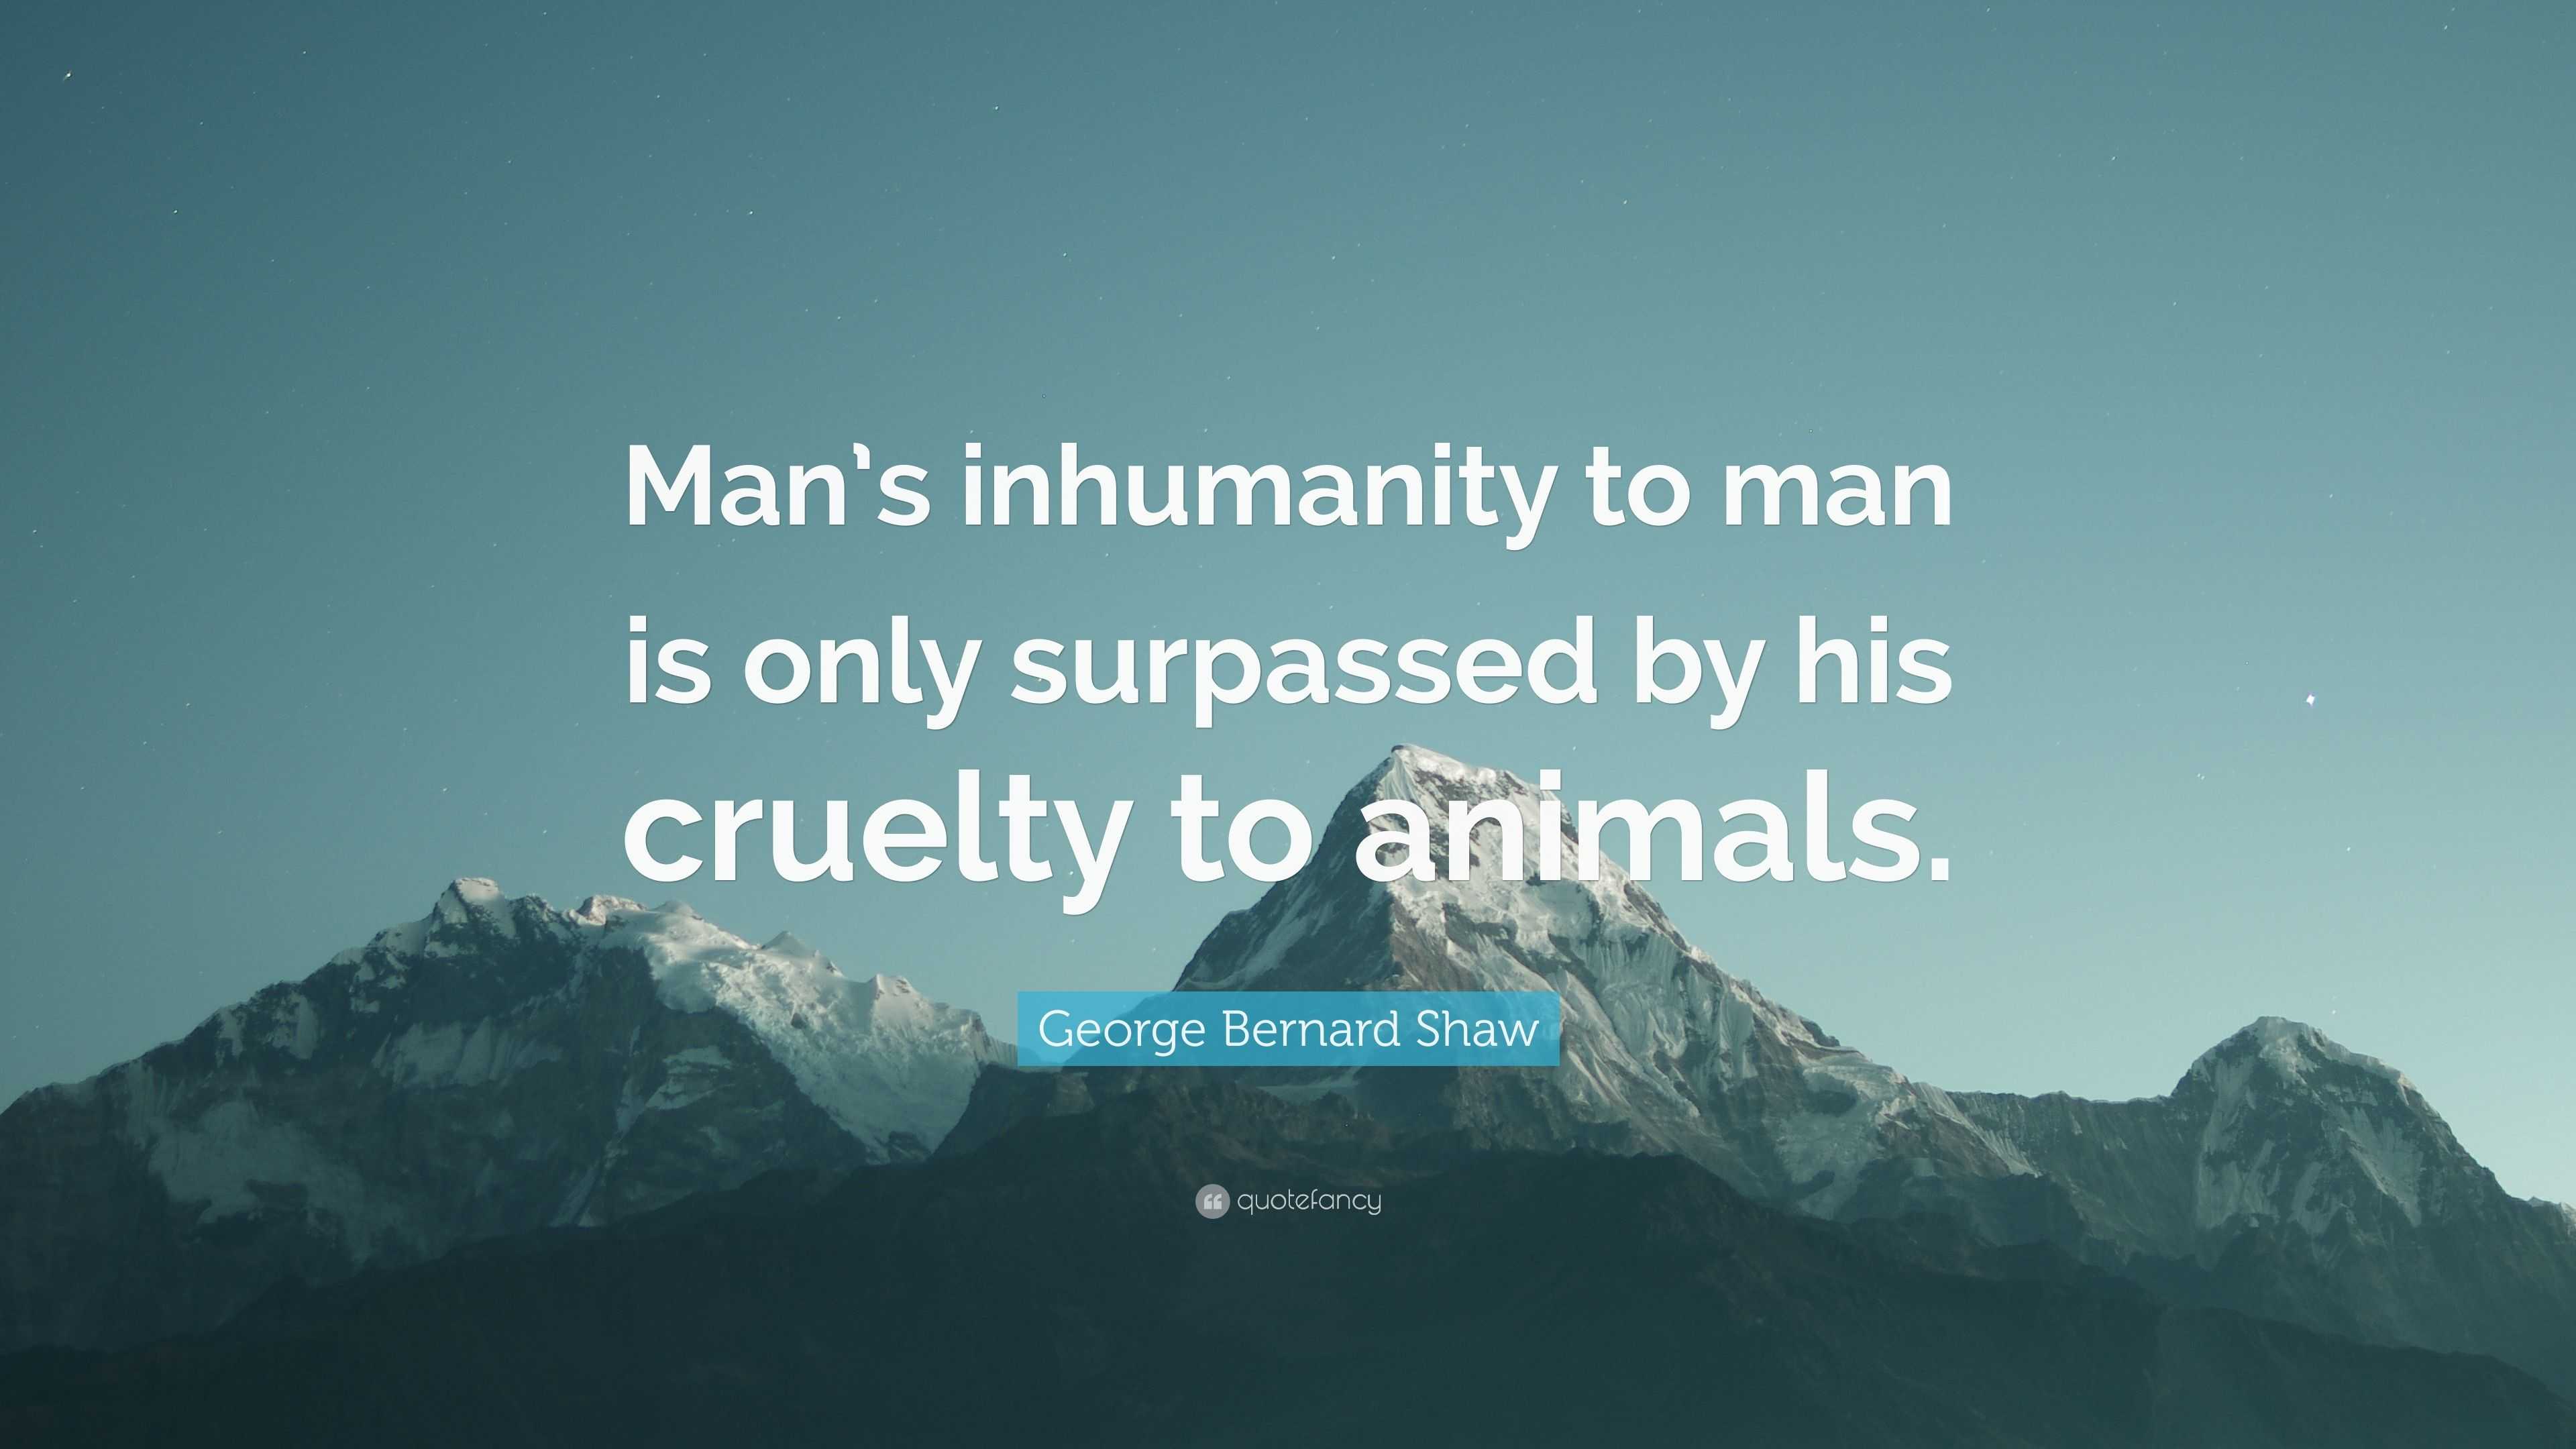 Bernard Shaw Quote “Man’s inhumanity to man is only surpassed